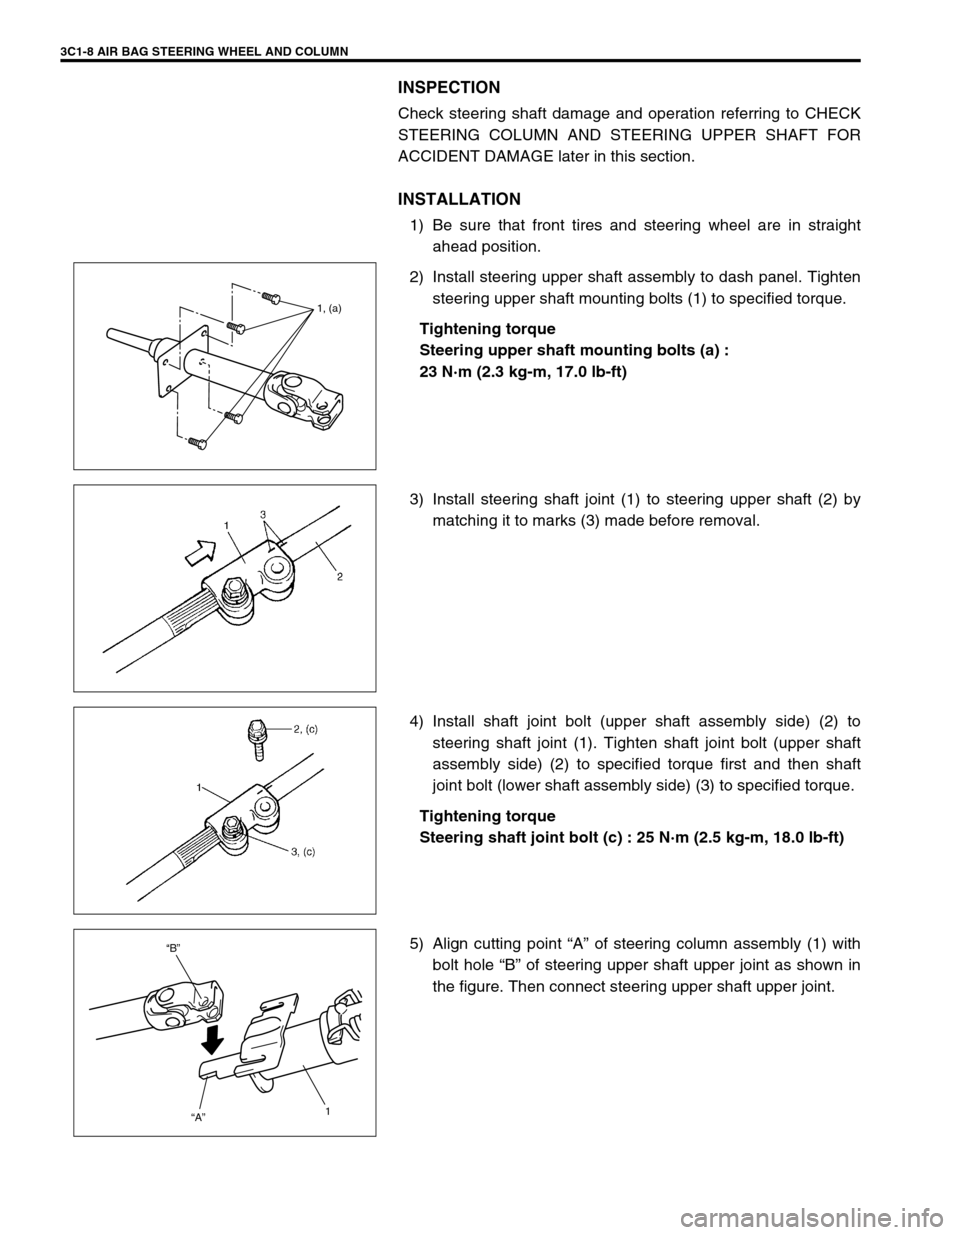 SUZUKI GRAND VITARA 2001 2.G Owners Manual 3C1-8 AIR BAG STEERING WHEEL AND COLUMN
INSPECTION
Check steering shaft damage and operation referring to CHECK
STEERING COLUMN AND STEERING UPPER SHAFT FOR
ACCIDENT DAMAGE later in this section.
INST